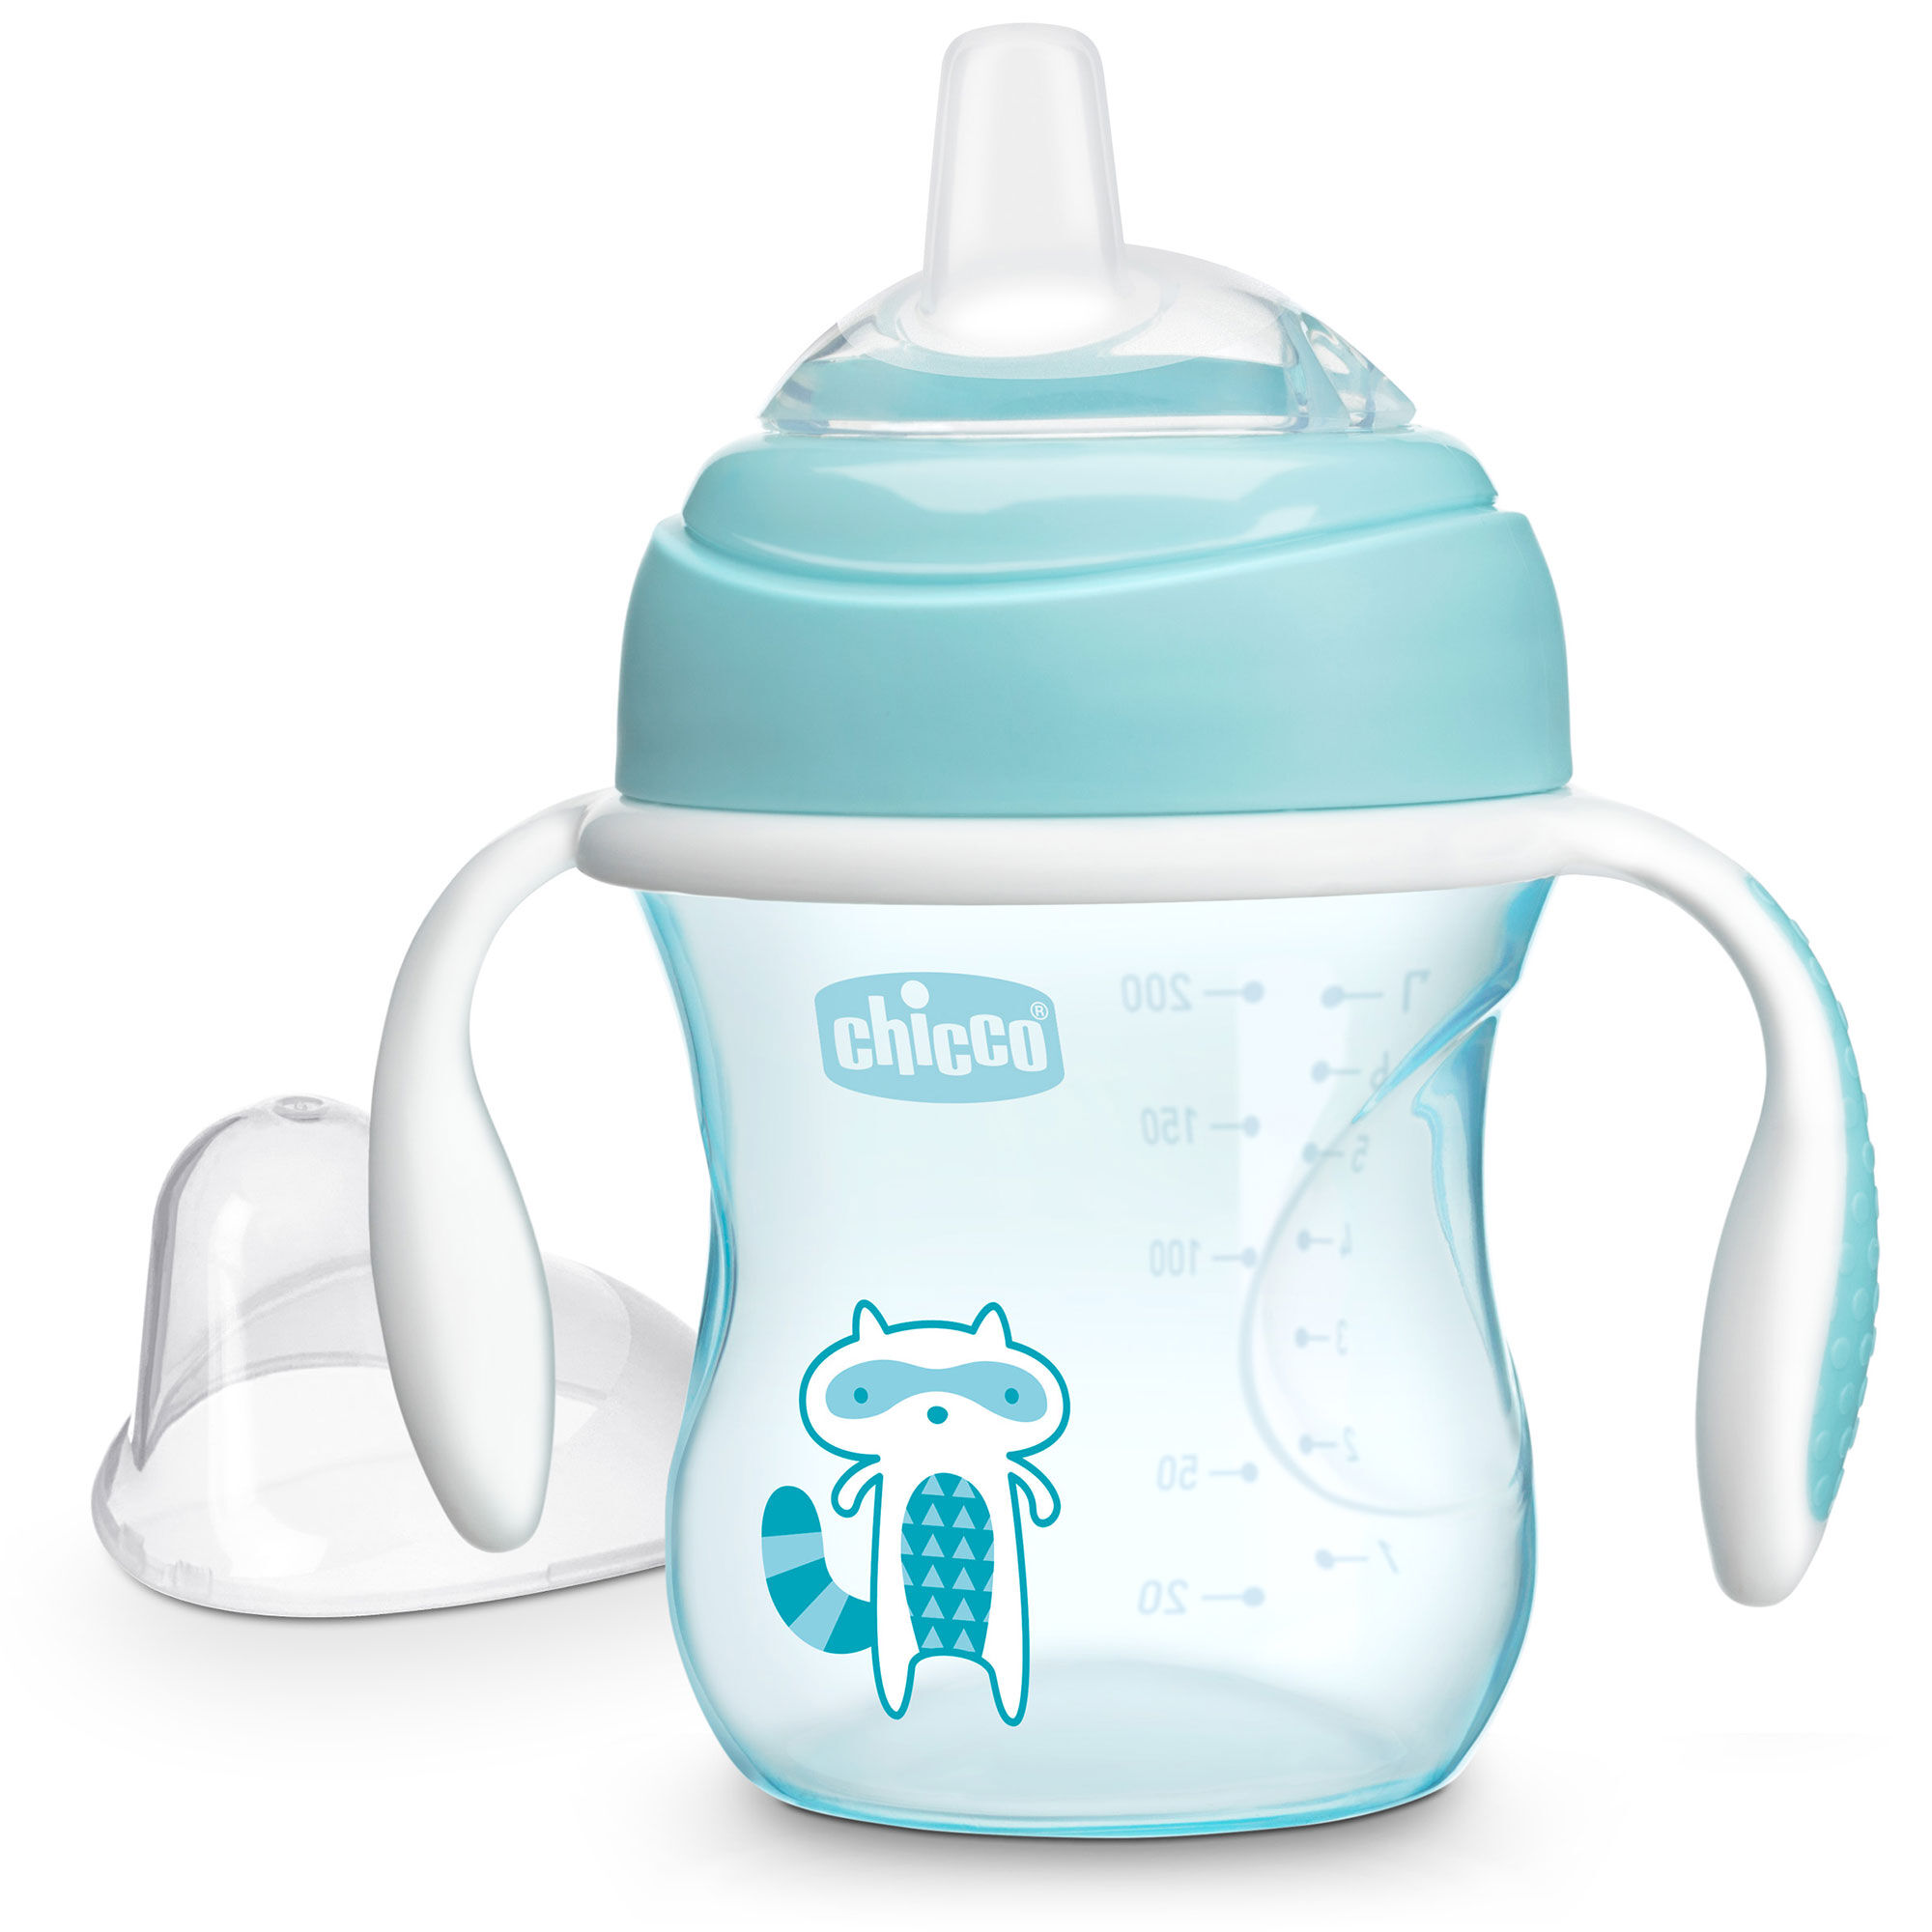 https://www.chiccousa.com/dw/image/v2/AAMT_PRD/on/demandware.static/-/Sites-chicco_catalog/default/dwab6380e6/images/products/feeding/silicone-spout/Transition-Cup-Boy-Main-Image.jpg?sw=2000&sh=2000&sm=fit